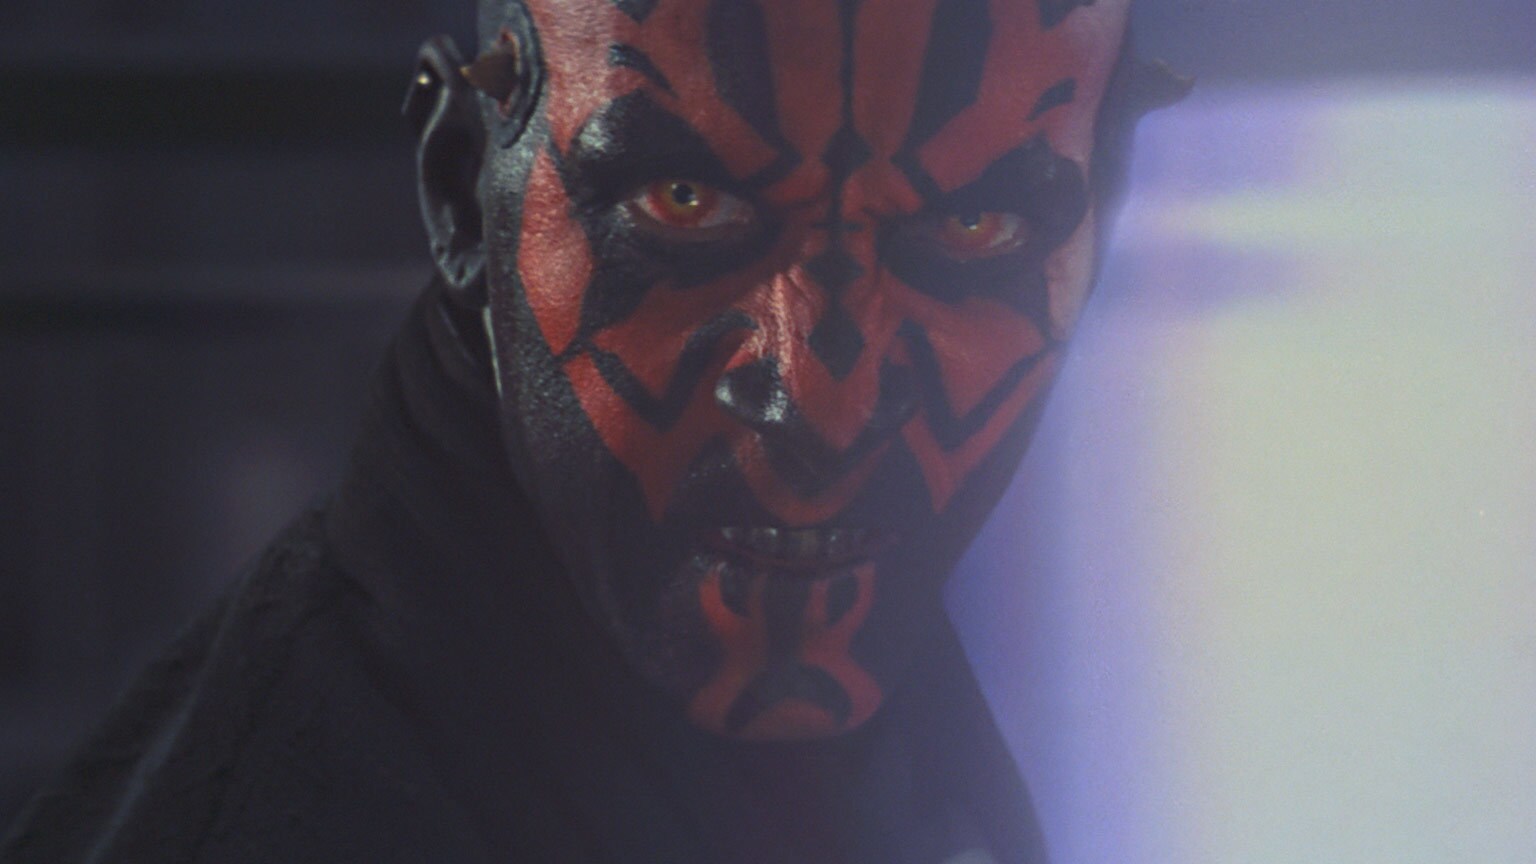 Poll: Who Is More Powerful - Darth Maul or Darth Vader?